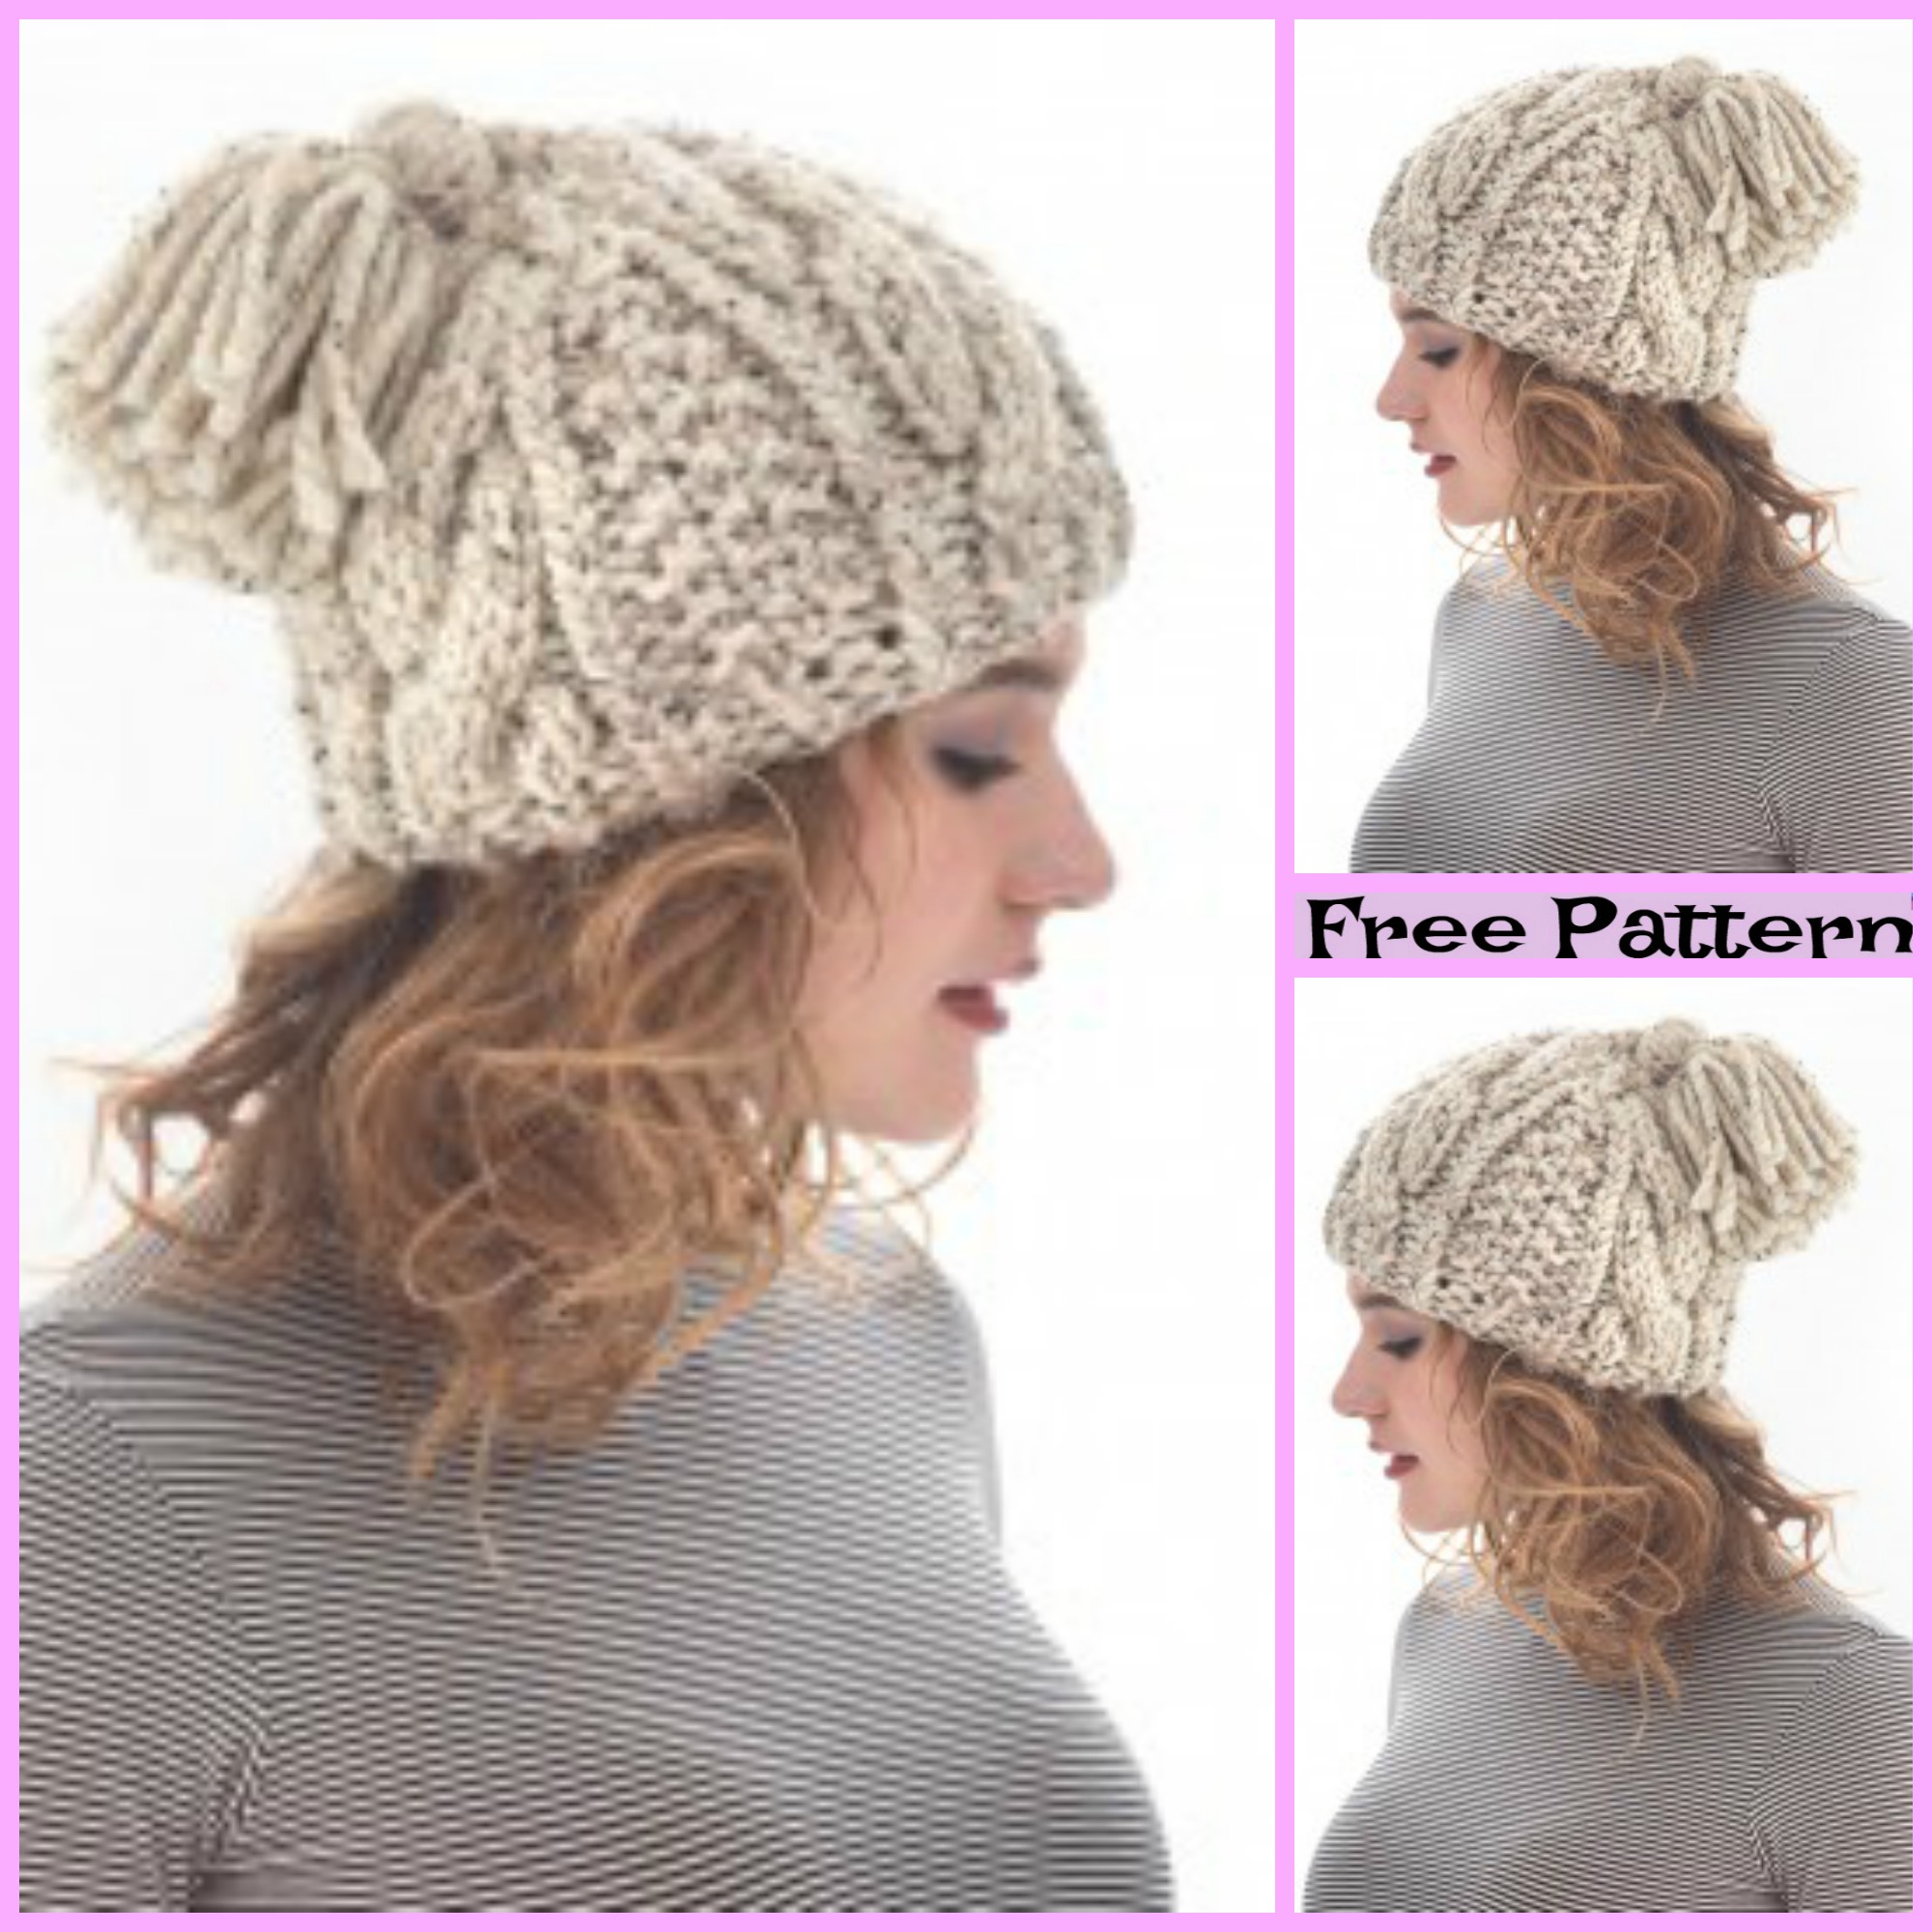 diy4ever-Knit Cozy Cable Hats - Free Patterns 